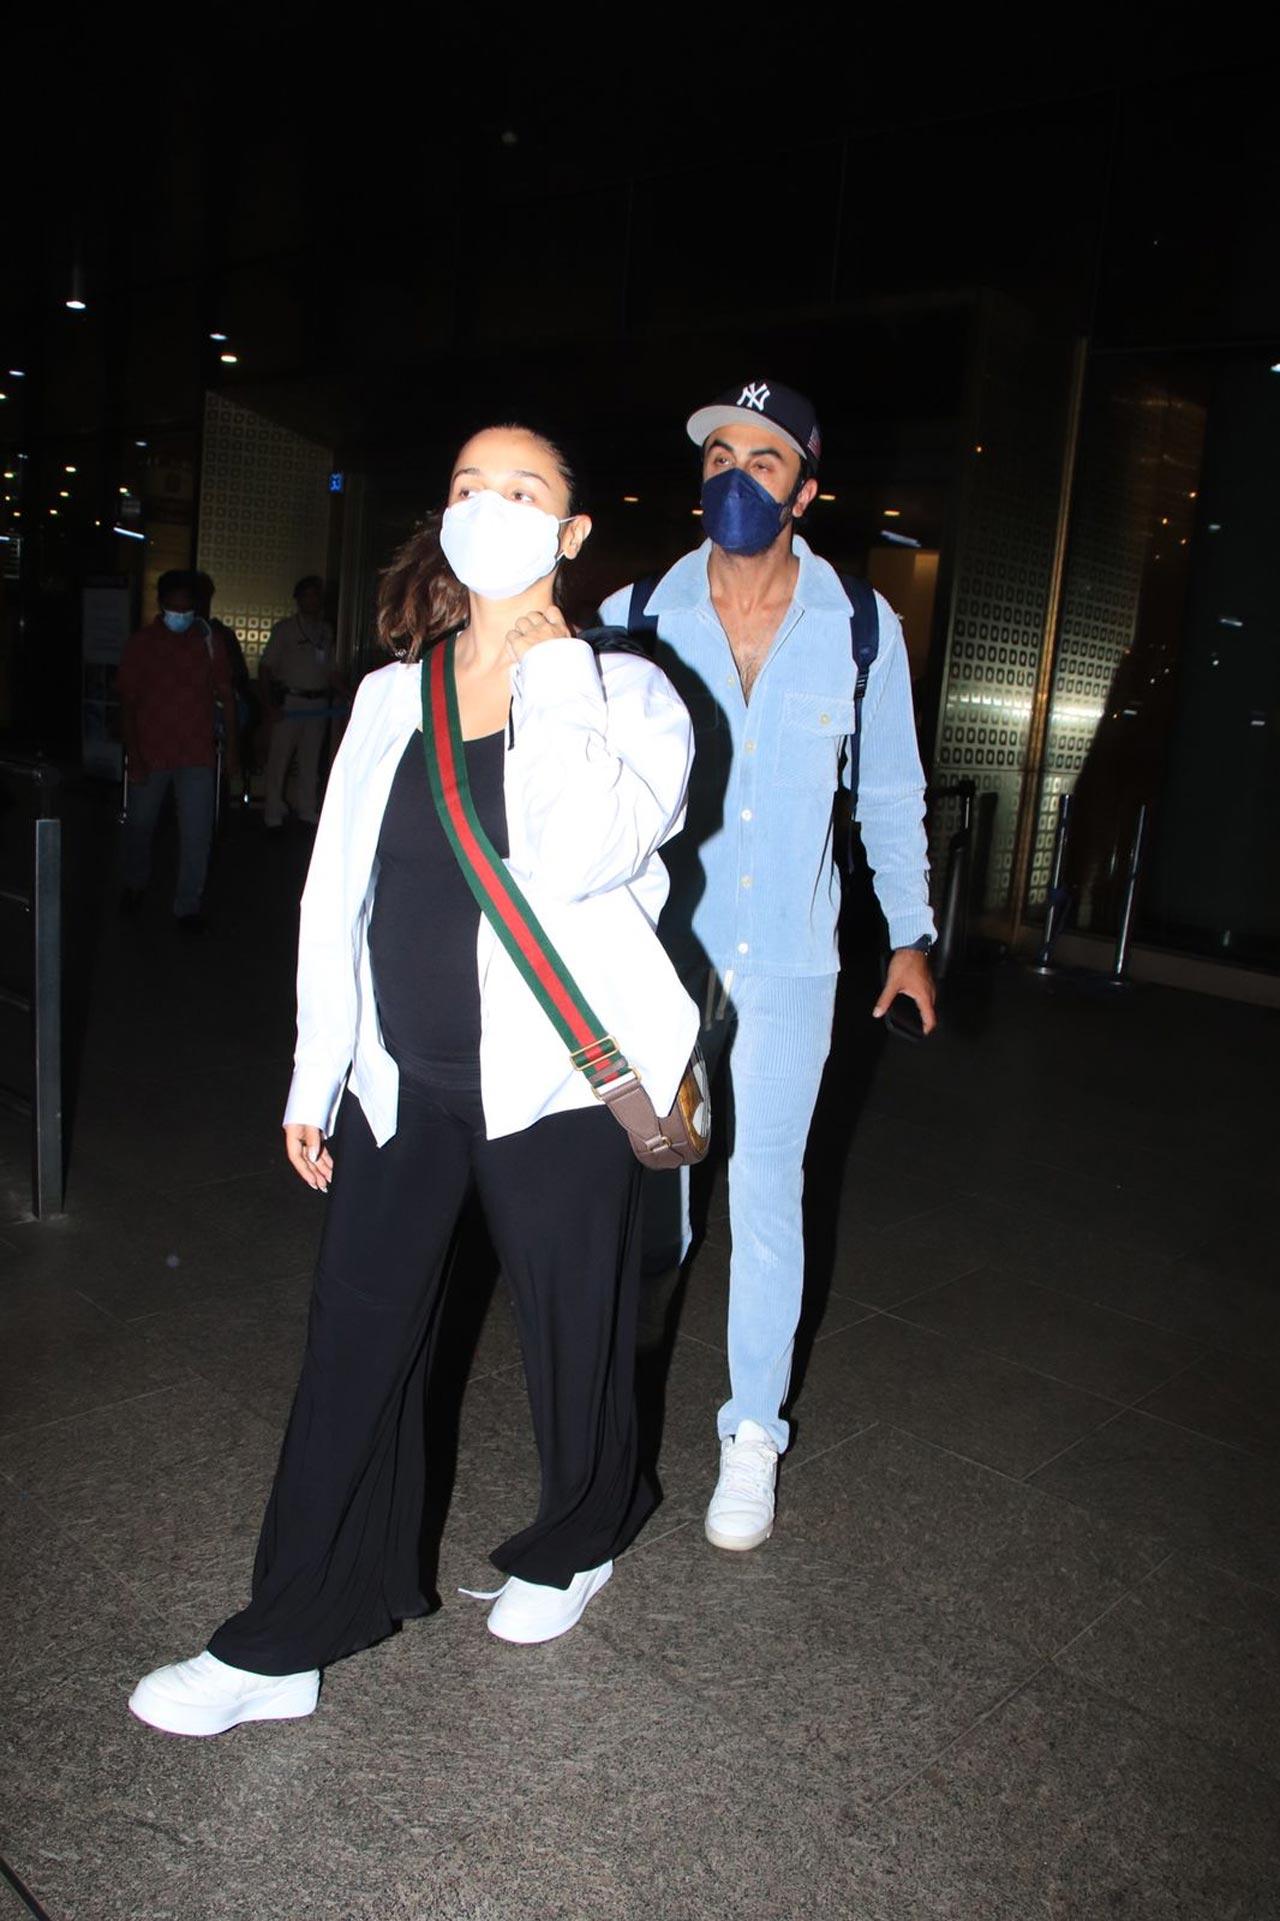 For the airport look, Alia wore an all-black ensemble with a white jacket and matching sneakers. Ranbir, on the other hand, opted for a blue shirt, matching pants, a cap and white sneakers. Both of them carried bags and wore face masks